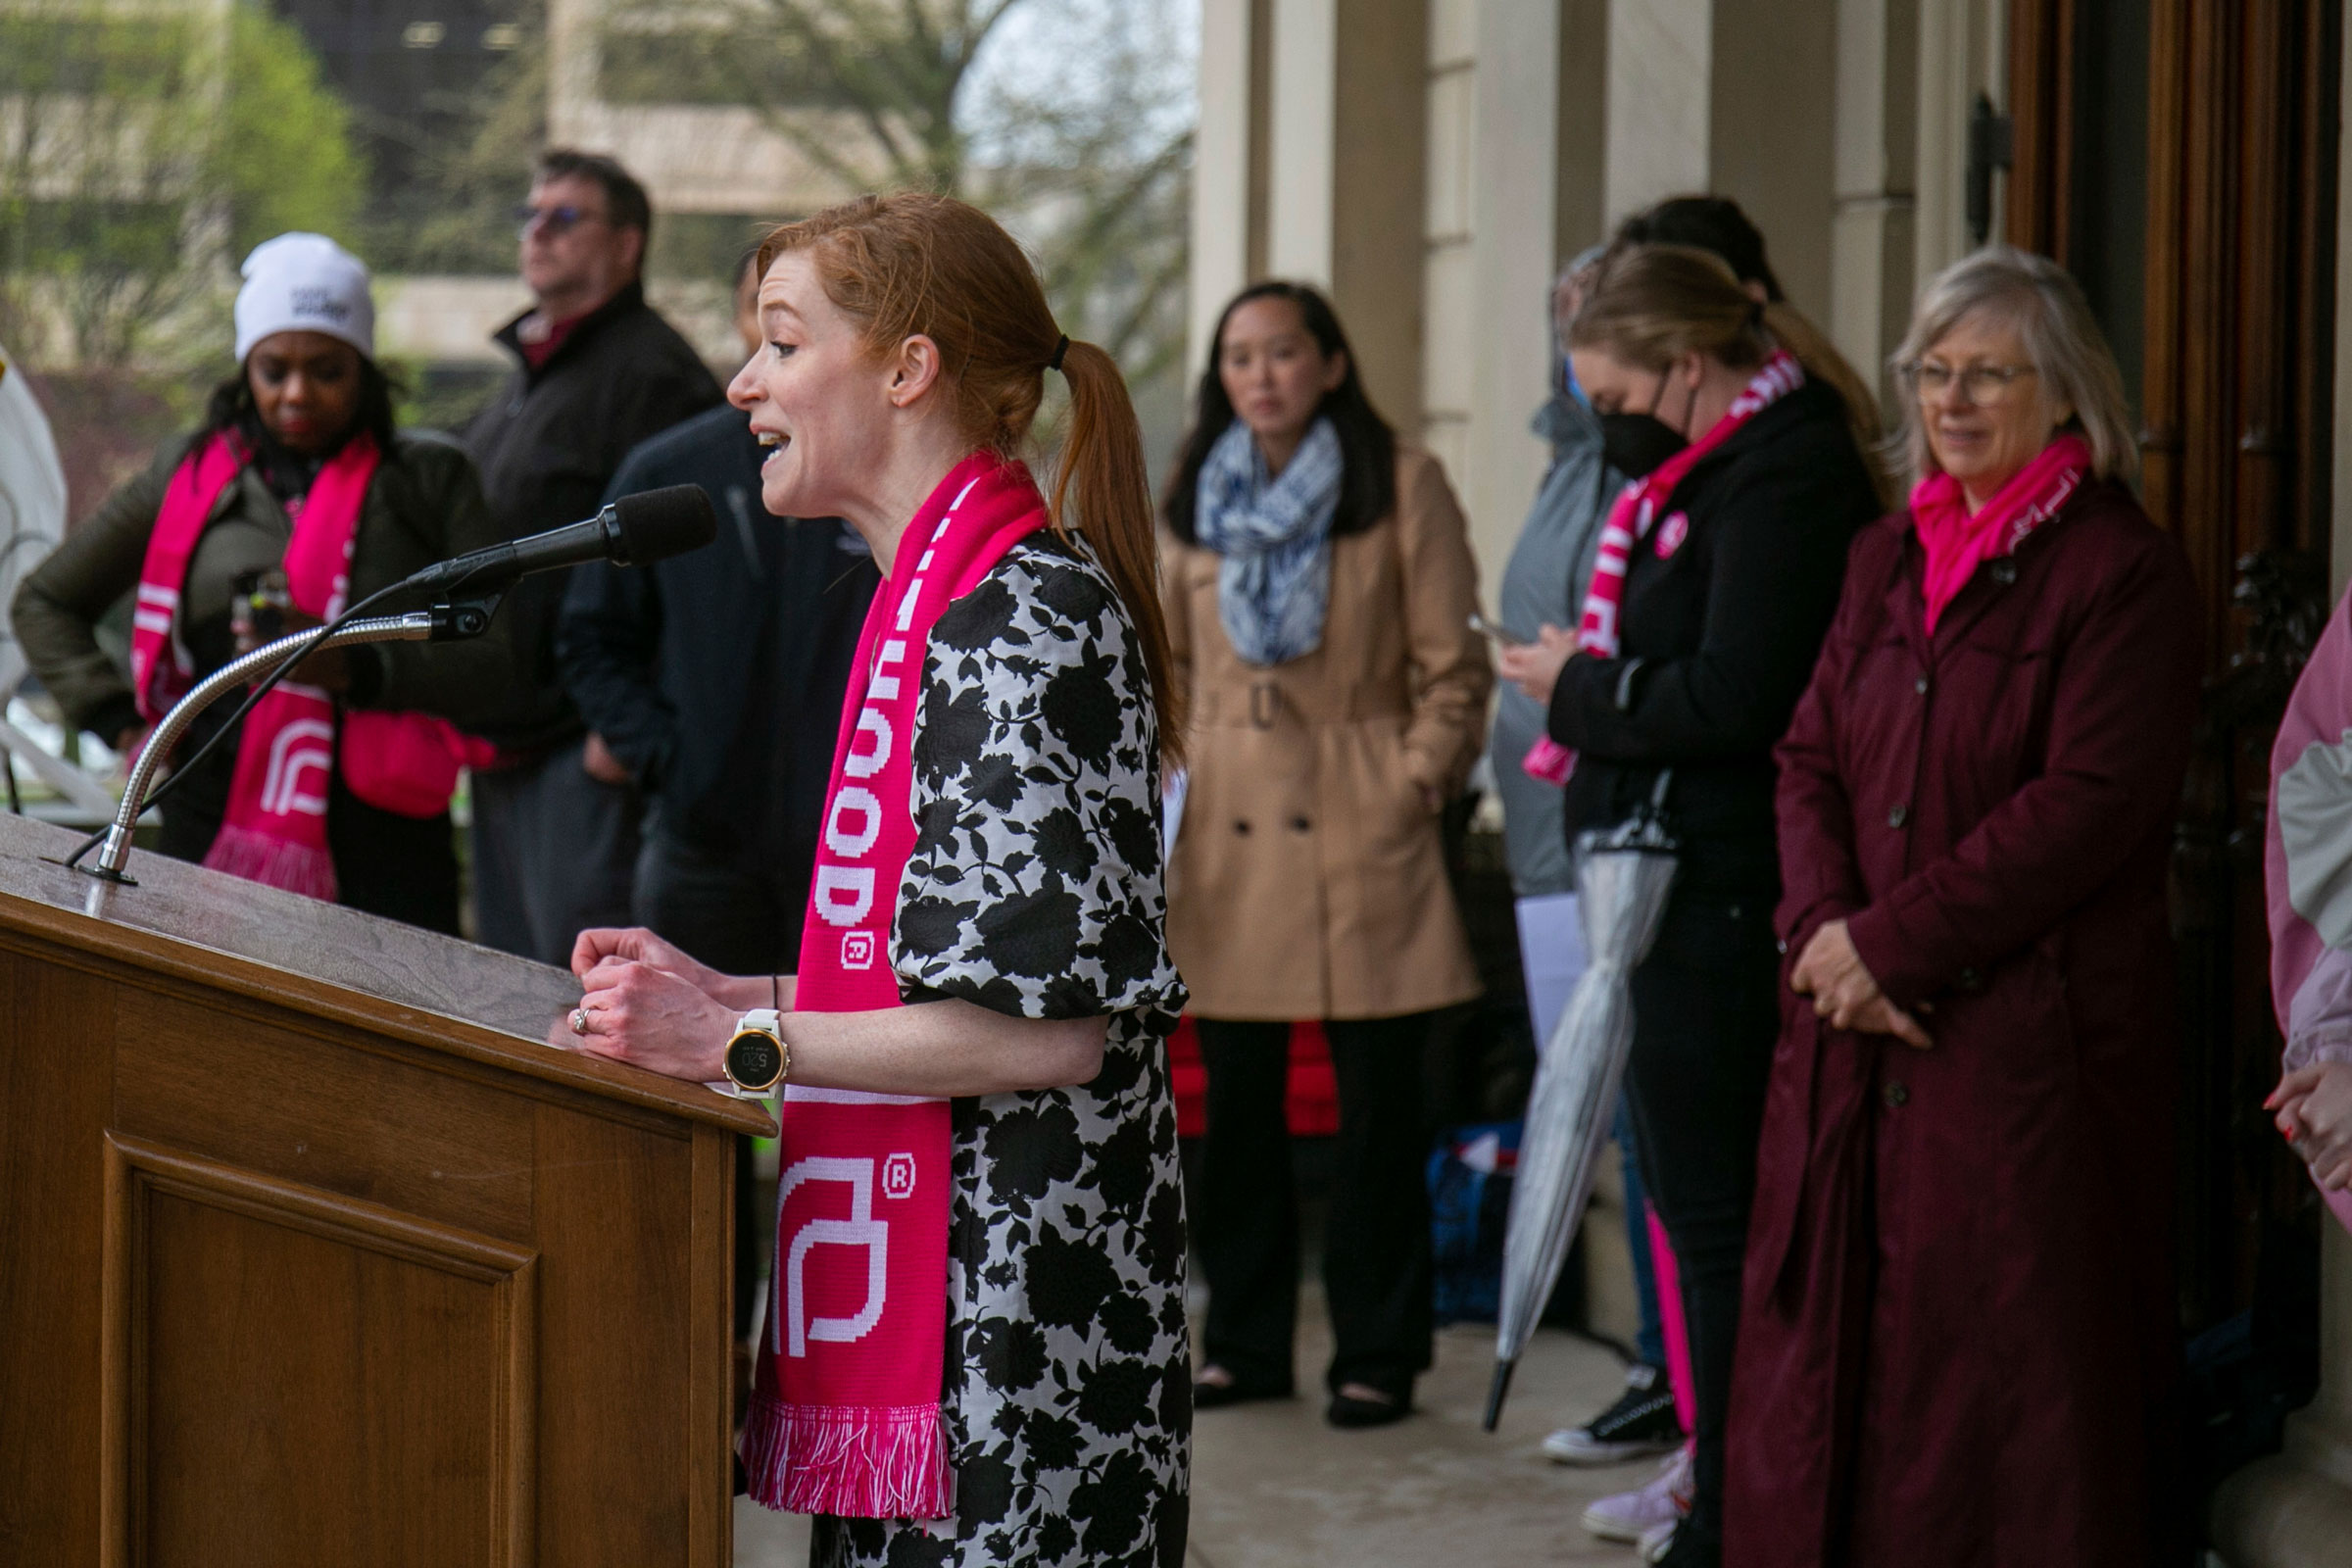 Michigan State Senator Mallory McMorrow speaks at a rally organized by Planned Parenthood Michigan, on the steps of the Michigan State Capitol building in Lansing, Mich., on May 3, 2022. (Daniel Shular—The Grand Rapids Press/AP)